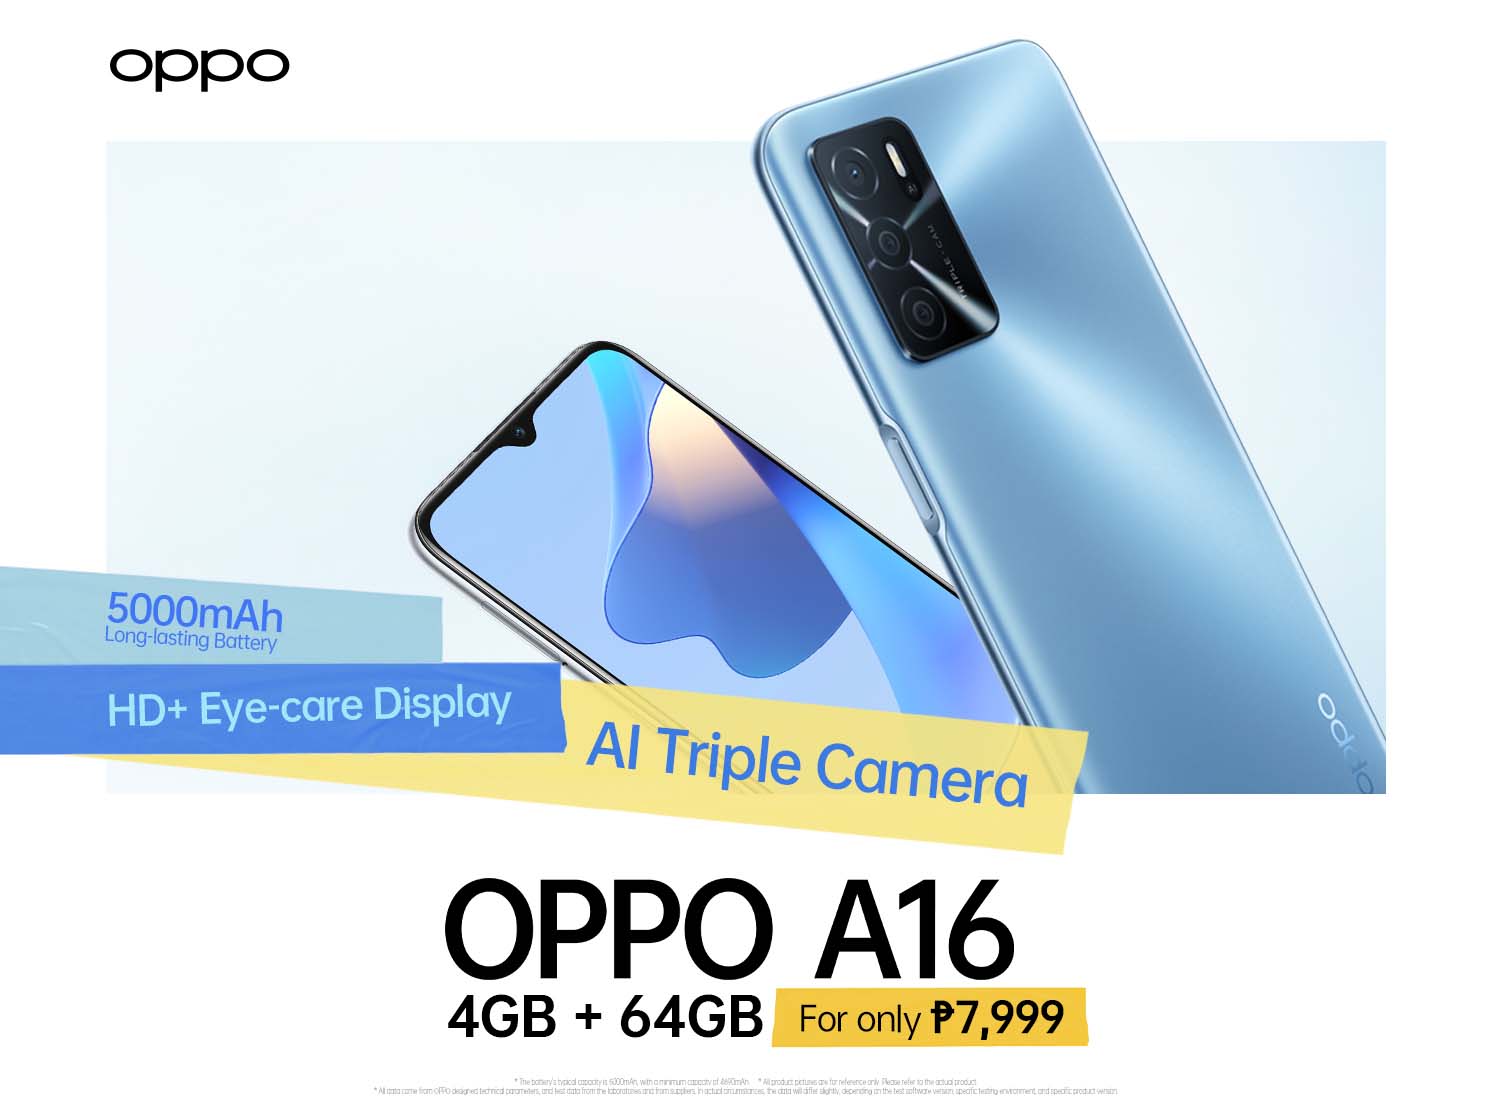 Feature-Packed OPPO A16 4GB Now Officially  Available in PH for Only PHP7,999